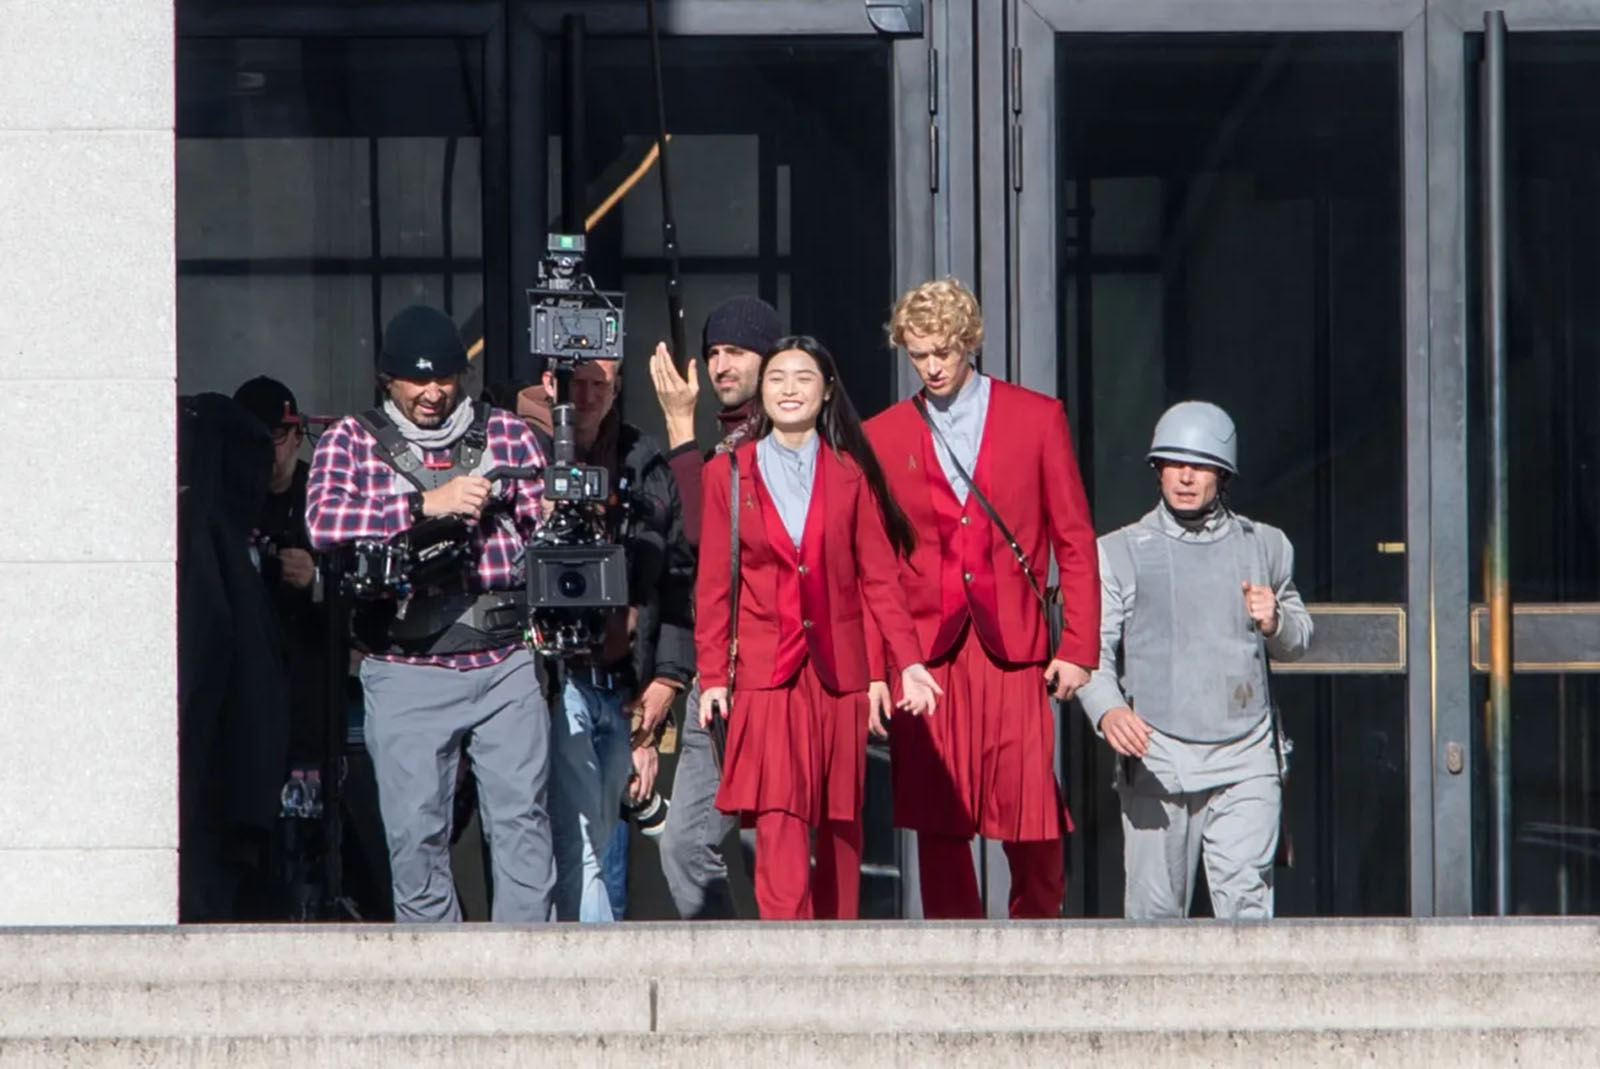 Blyth and Ashley Liao, who plays mentor Clemensia, on set. Image © Lionsgate